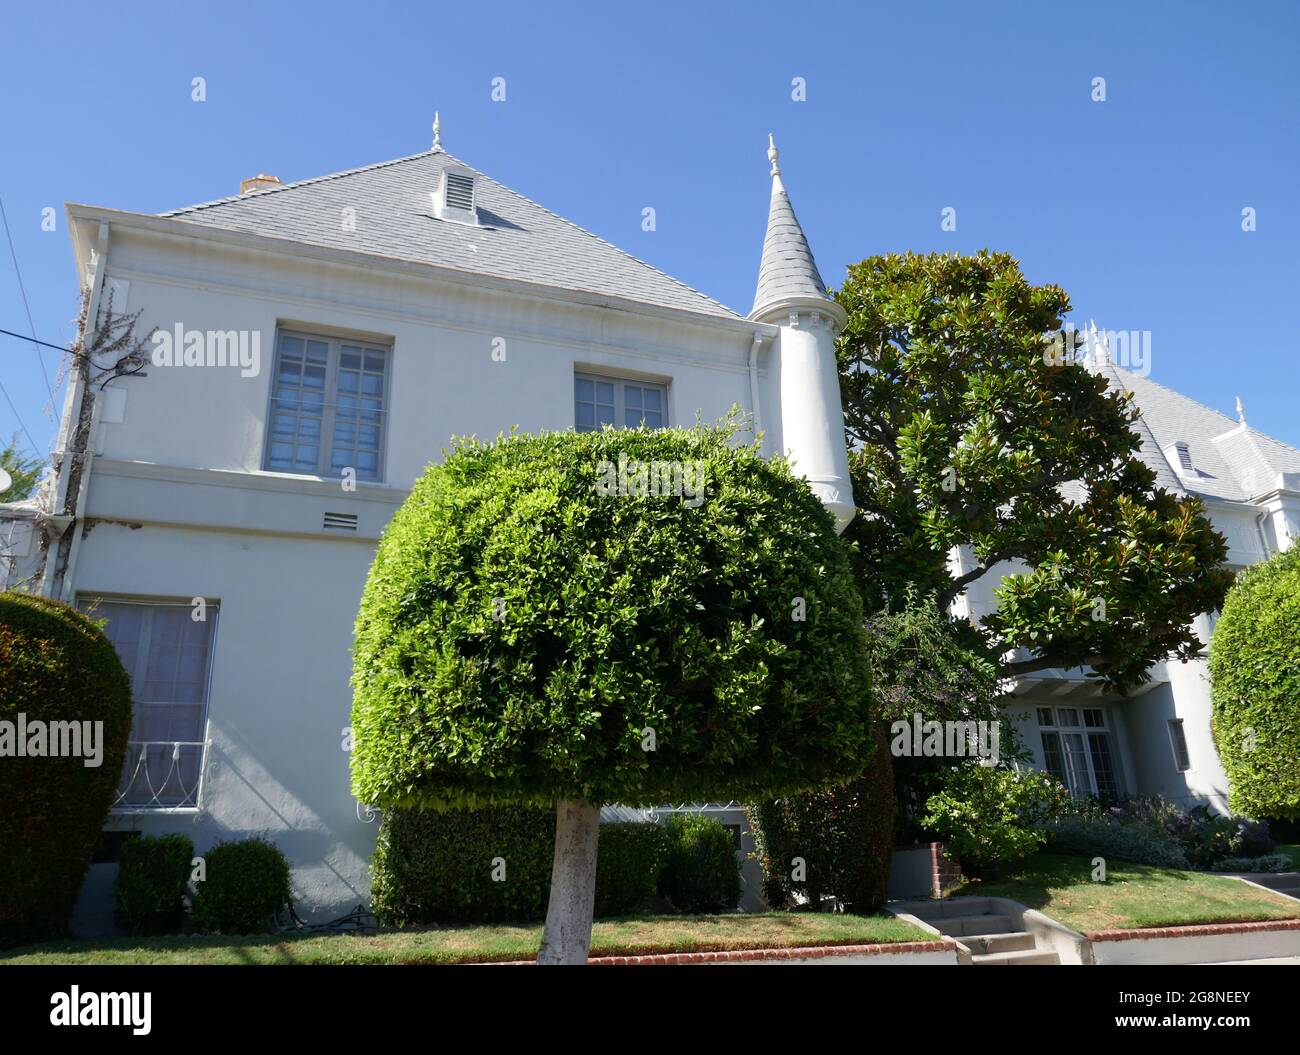 Los Angeles, California, USA 21st July 2021 Singer Madonna and actor Sean Penn's former home/residence and former home of Actresses Marilyn Monroe, Marlene Dietrich and Greta Garbo on July 21, 2021 in Los Angeles, California, USA. Photo by Barry King/Alamy Stock Photo Stock Photo